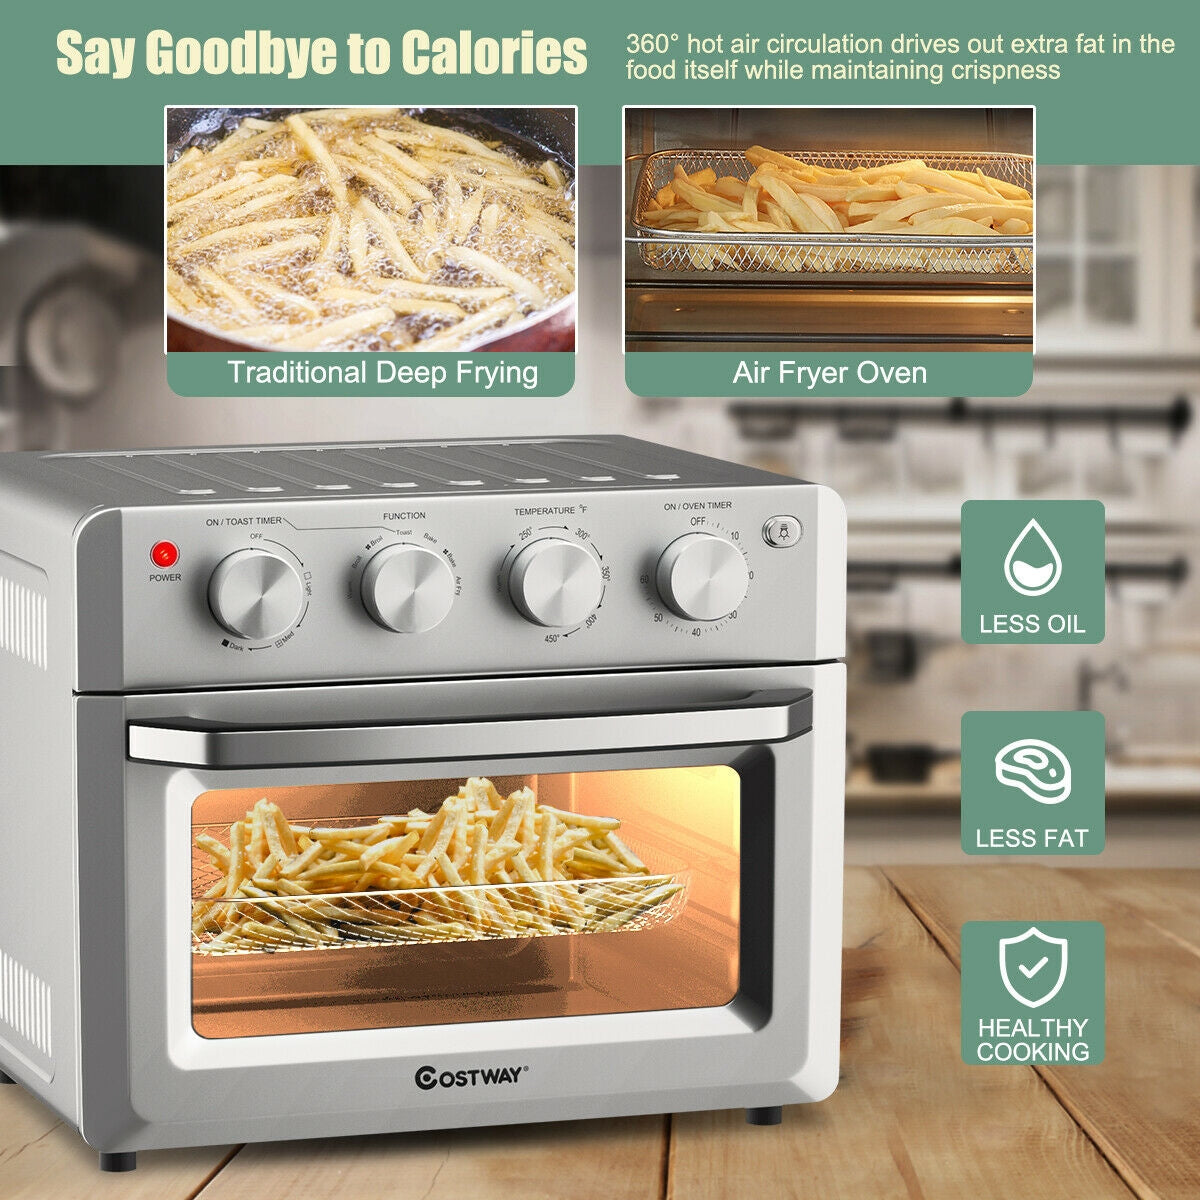 Enjoy Healthy Oil-Free Cooking: Unlike traditional cooking methods that rely on hot oil, our convection toaster oven utilizes balanced heating with four heating tubes on the top and two on the bottom. With an adjustable temperature range of 250℉-450℉, excess fat is effectively removed from the food while preserving its crispy texture and delicious taste.